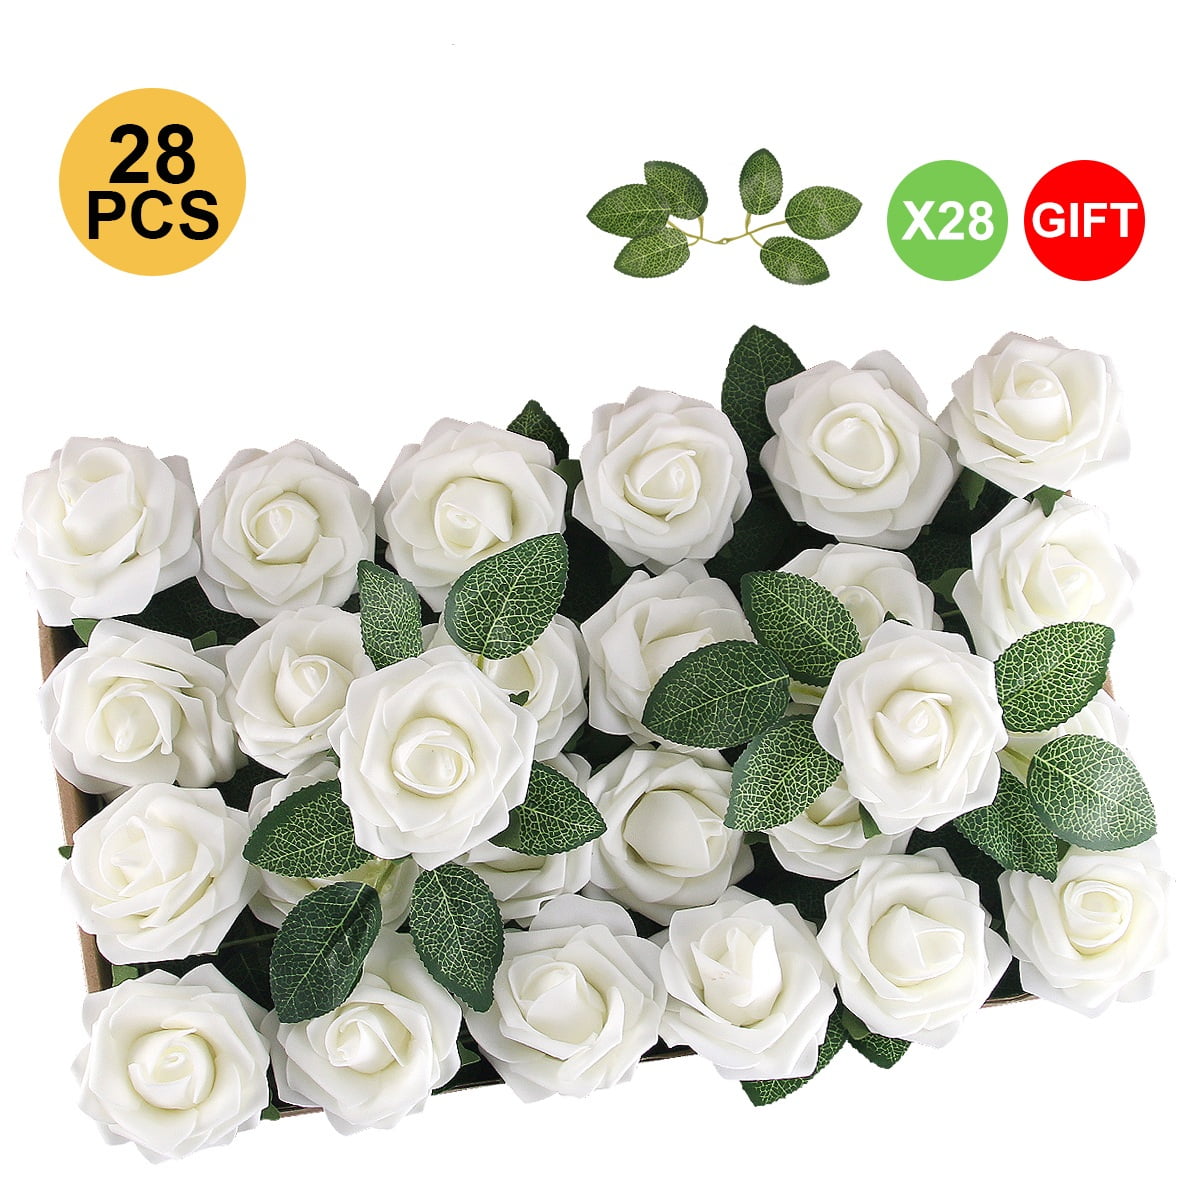 White 55 Mini Roses Buds Silk Flowers Wedding Bouquets Artificial Decor Crafts 